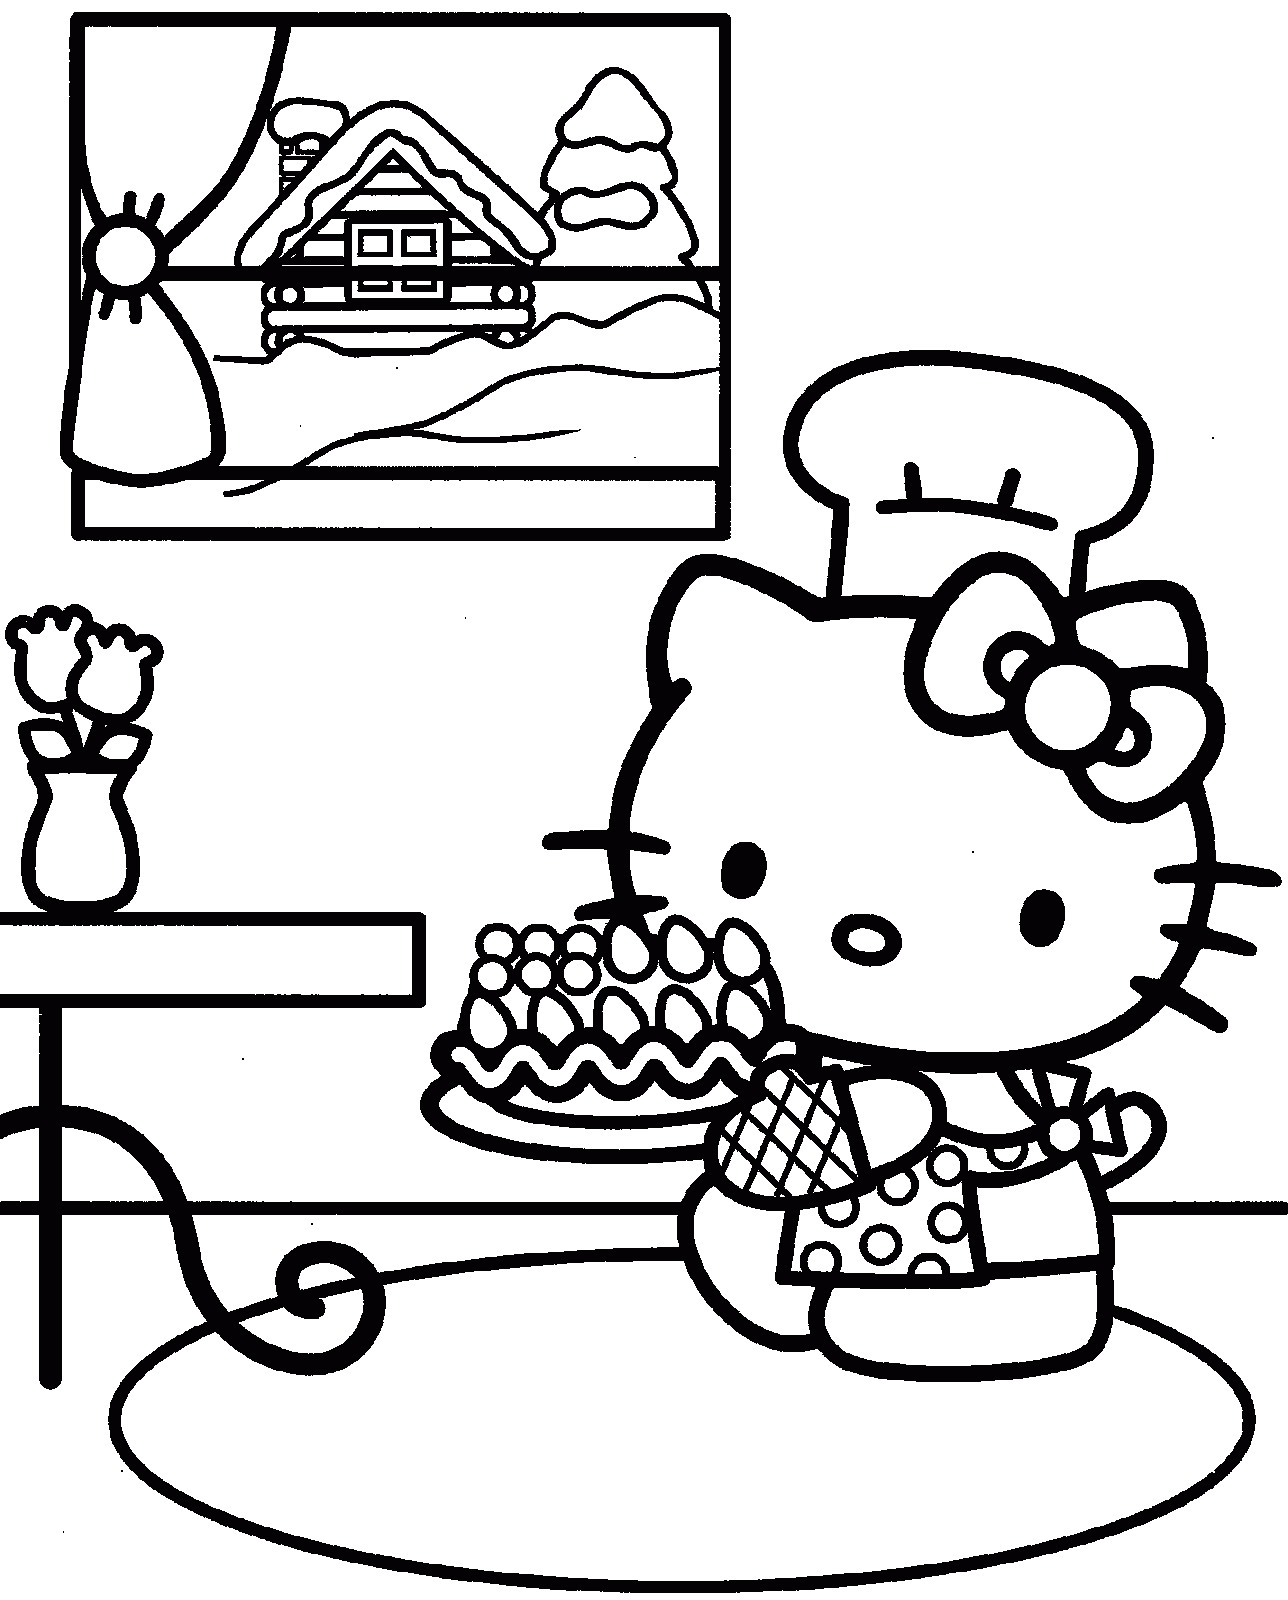 coloring pages of hello kitty free printable hello kitty coloring pages for pages hello coloring of kitty pages 